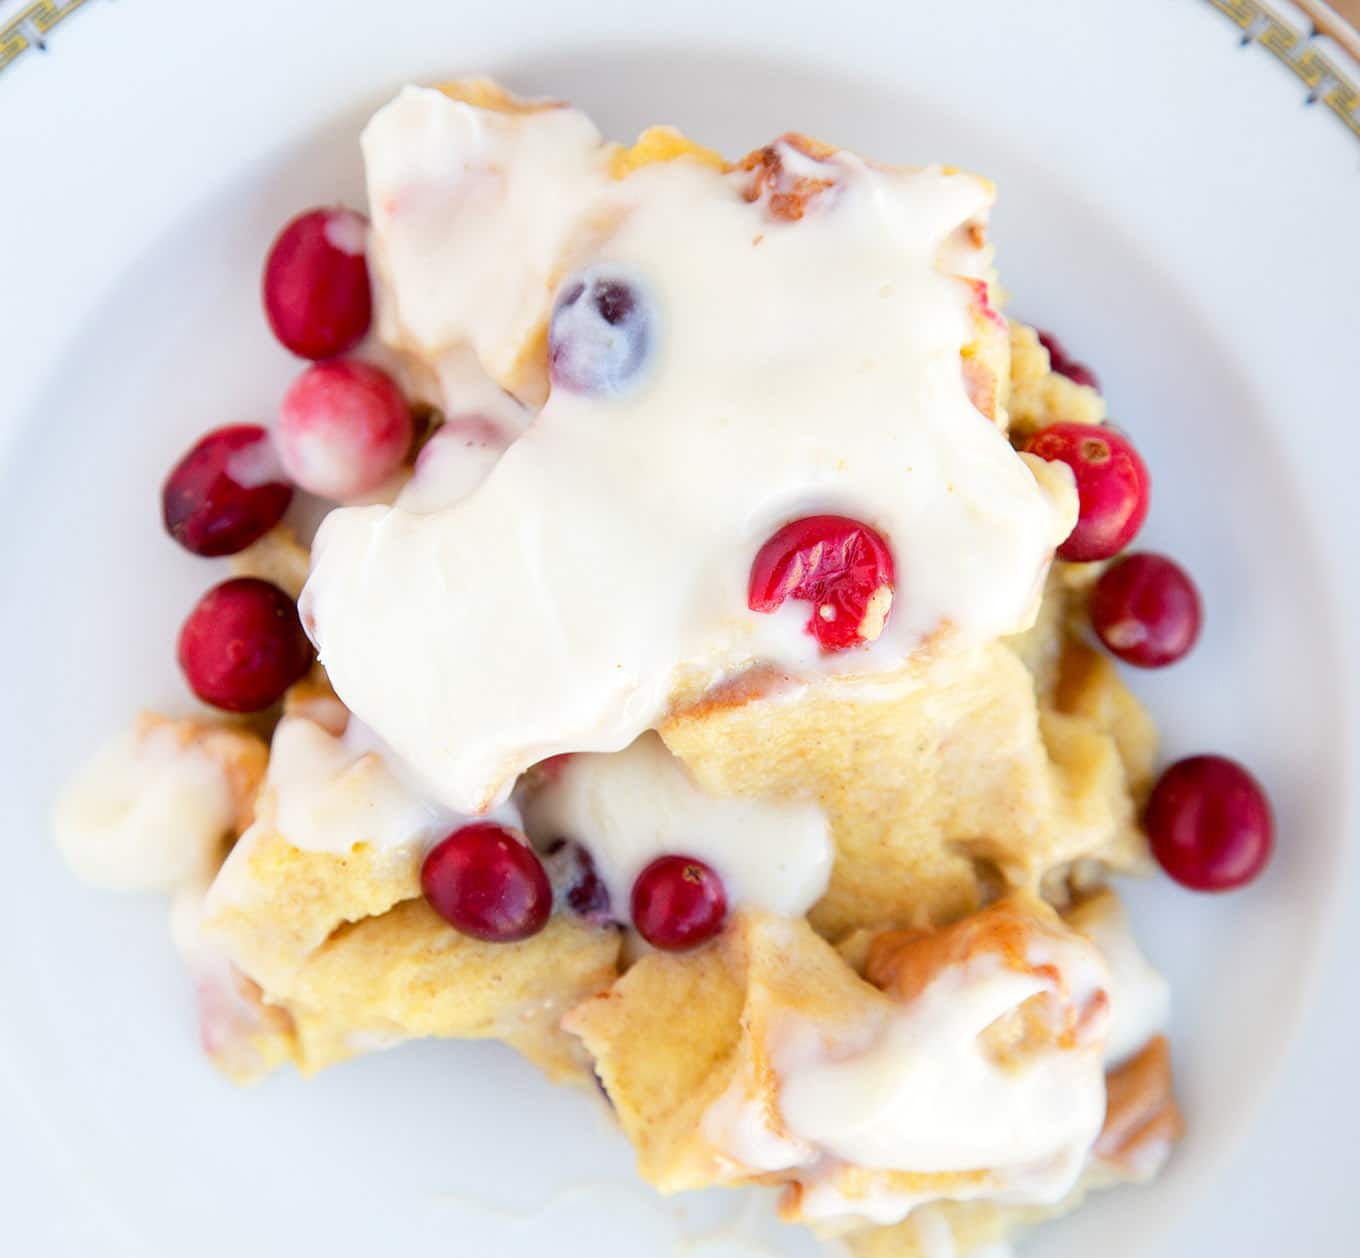 Cranberry Eggnog Bread Pudding with a Bourbon Cream Cheese Frosting